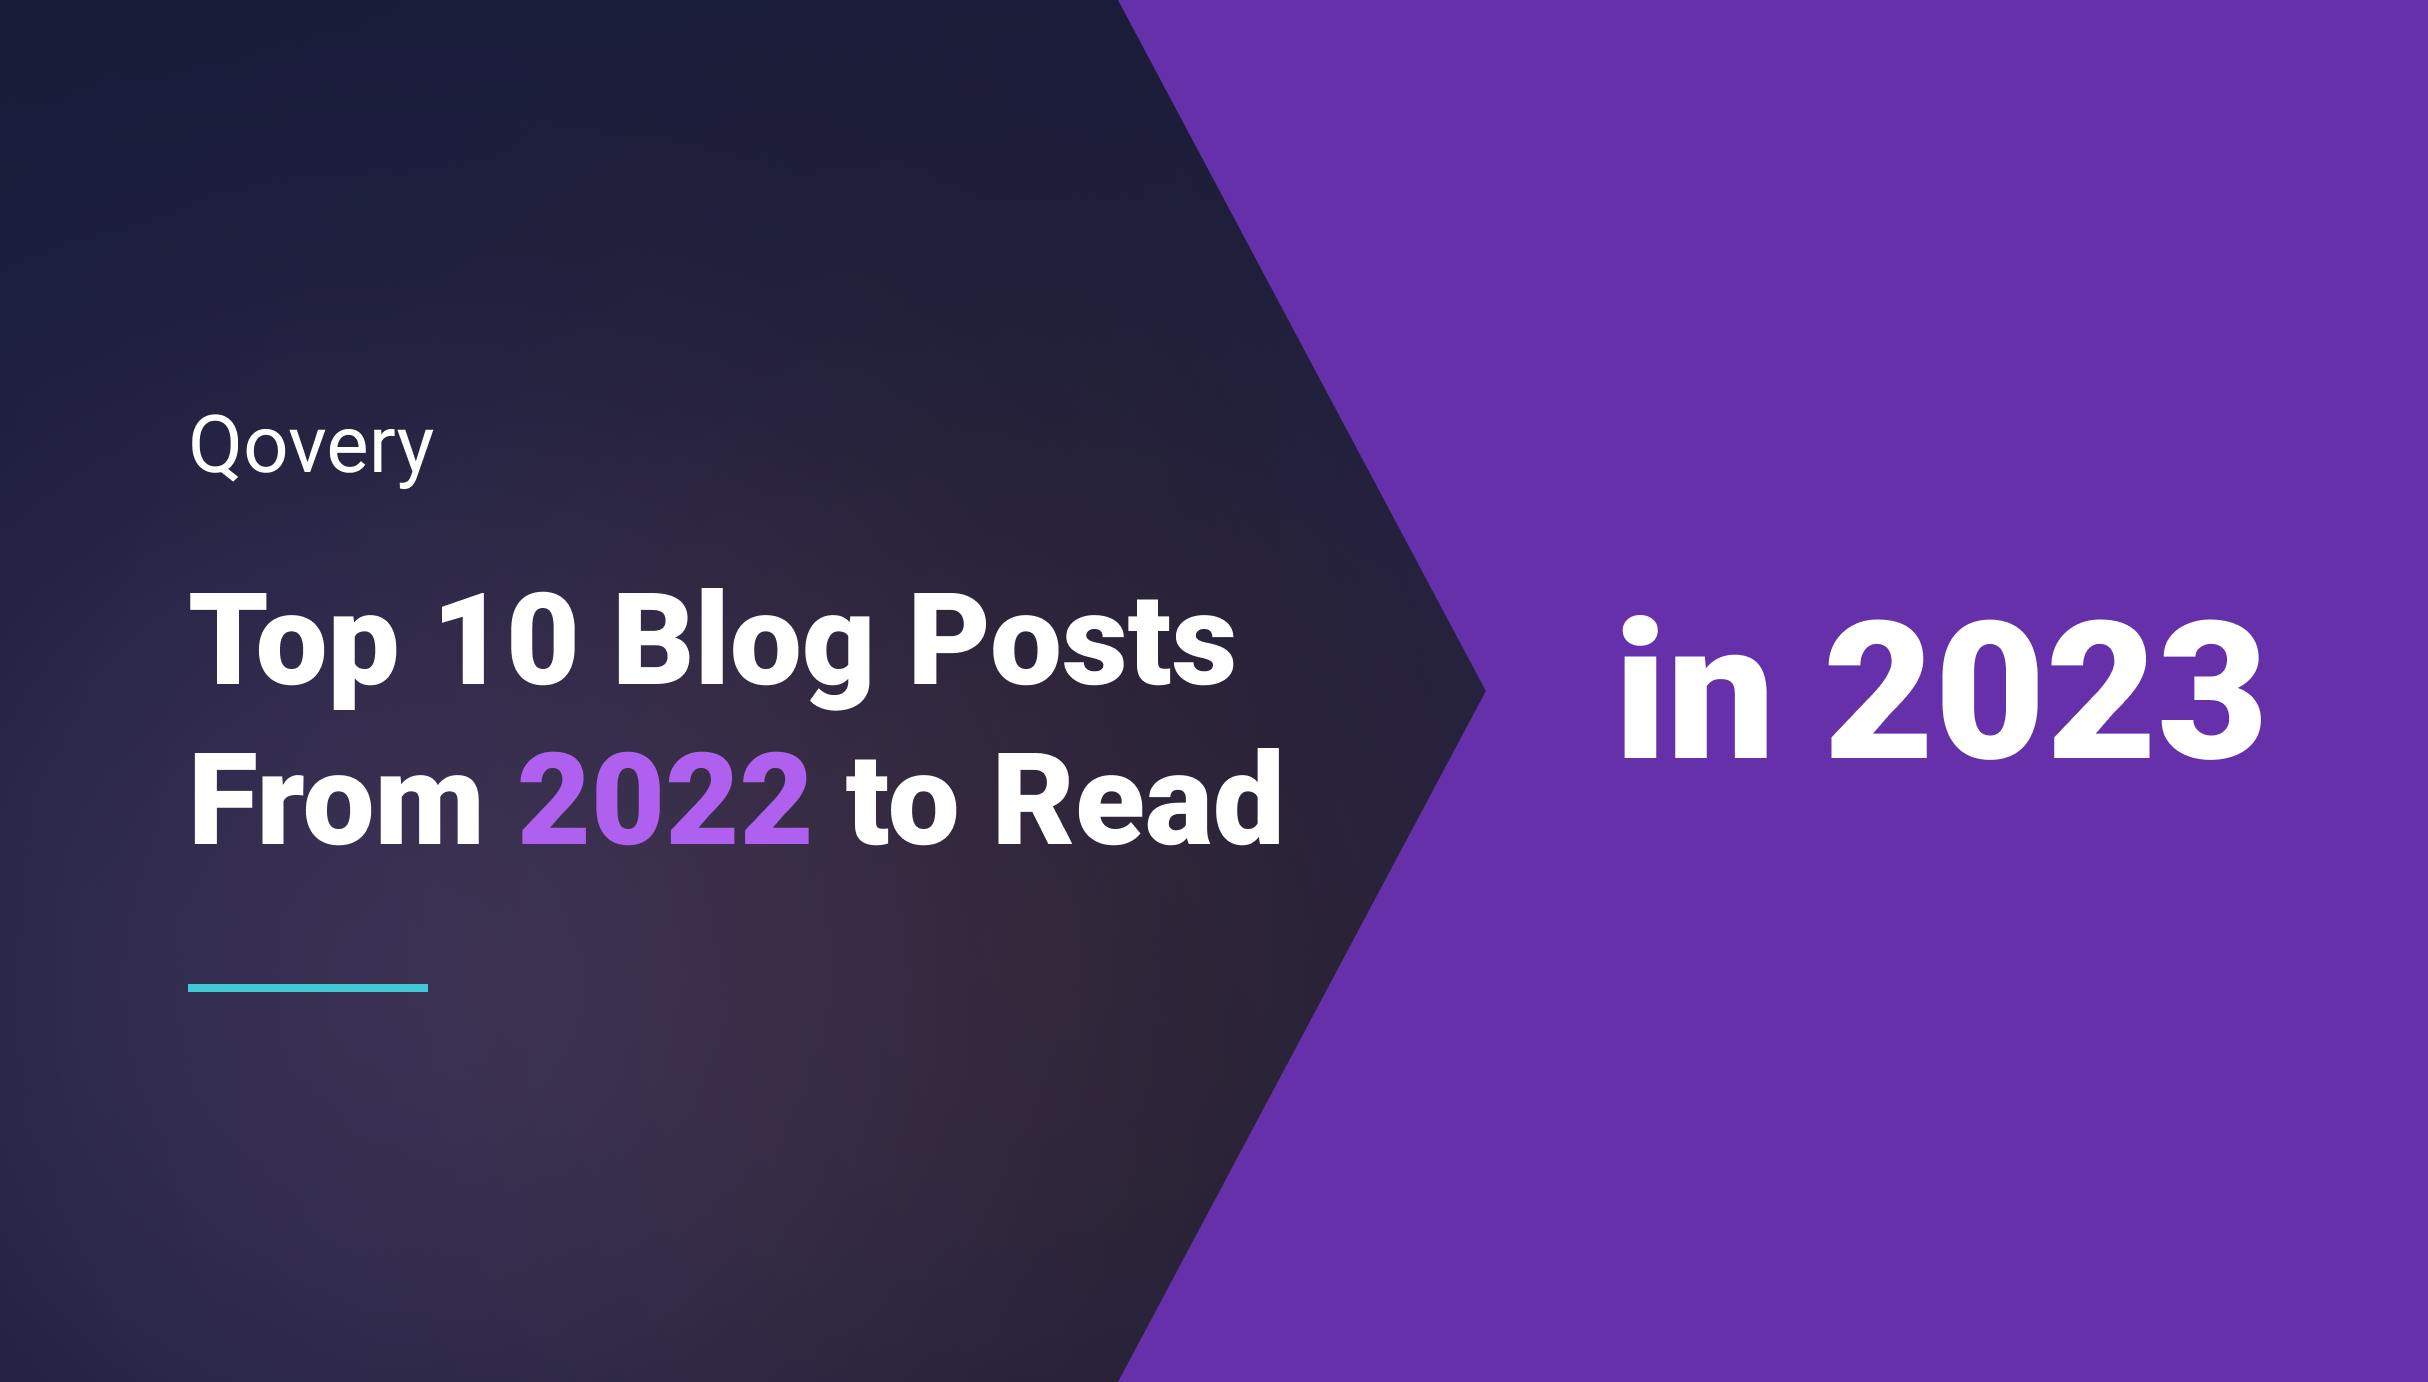 Qovery's Top 10 Blog Posts of 2022 to Read in 2023 - Qovery